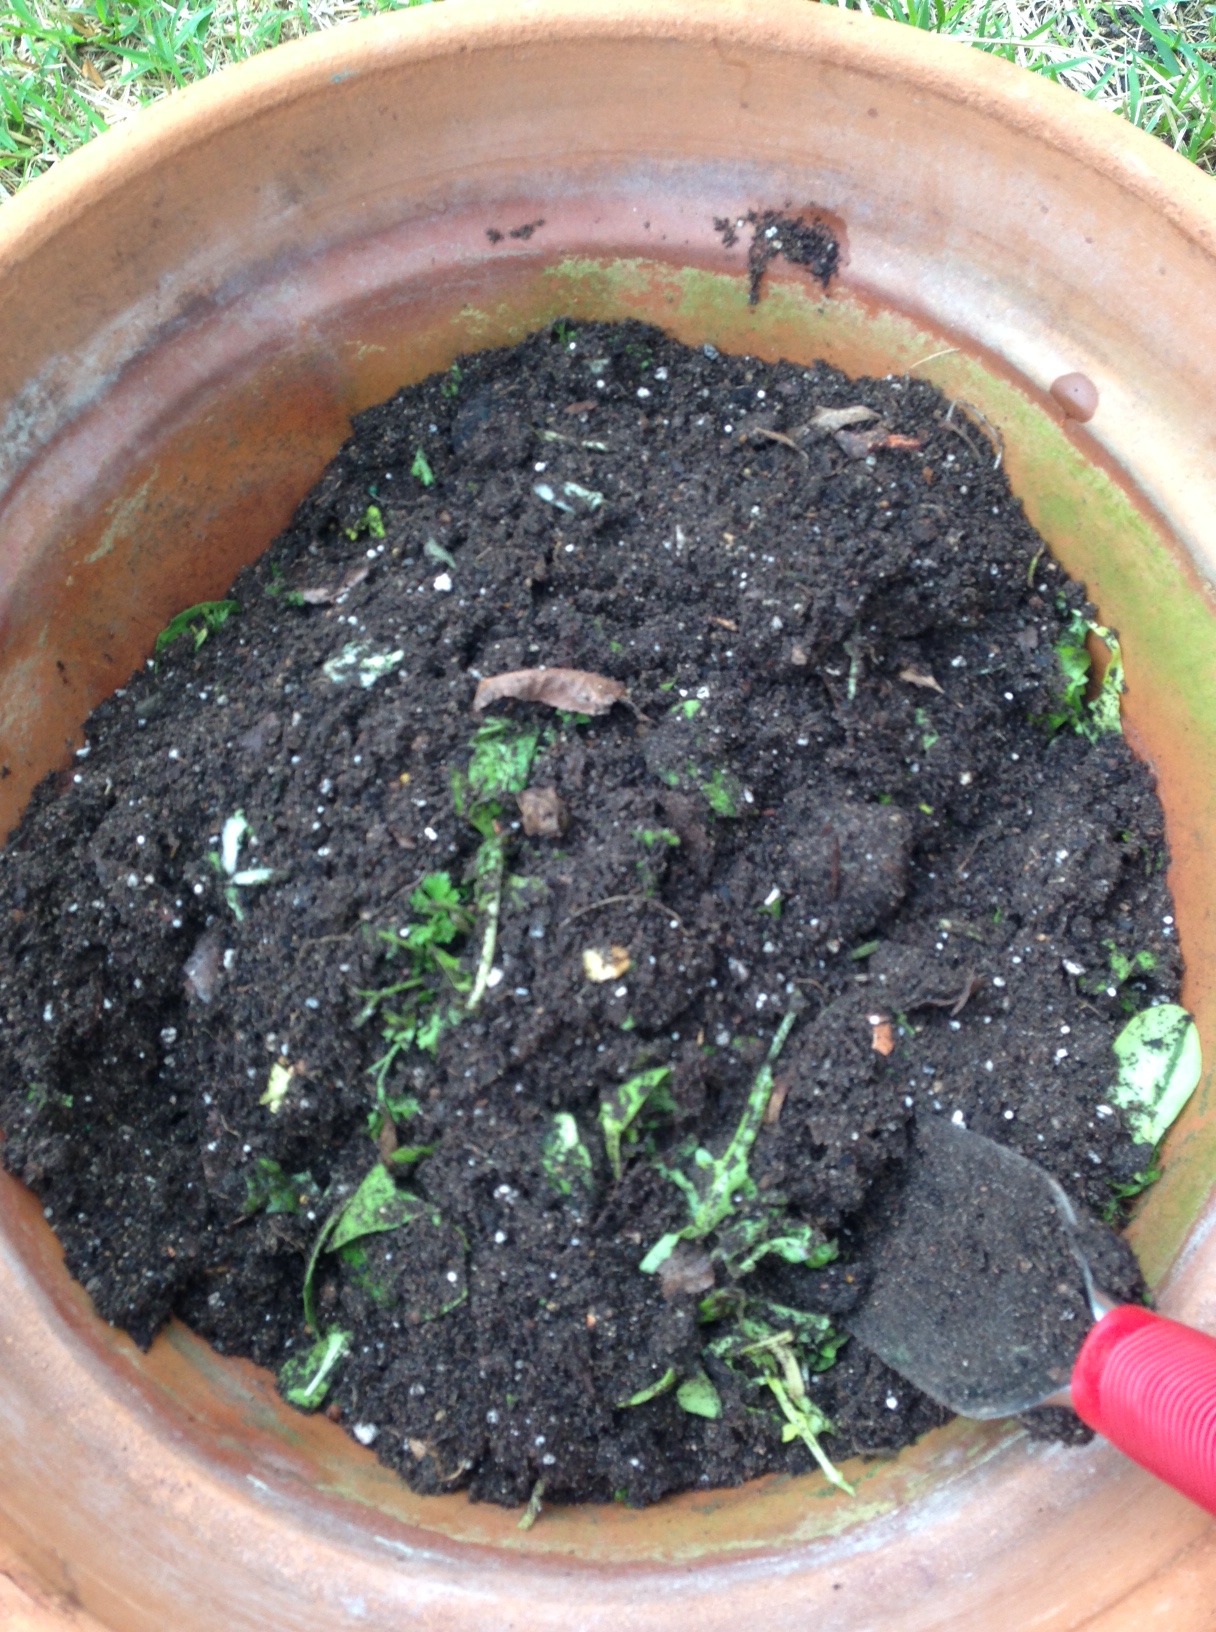 Composting In Clay Pot – From The Observatory